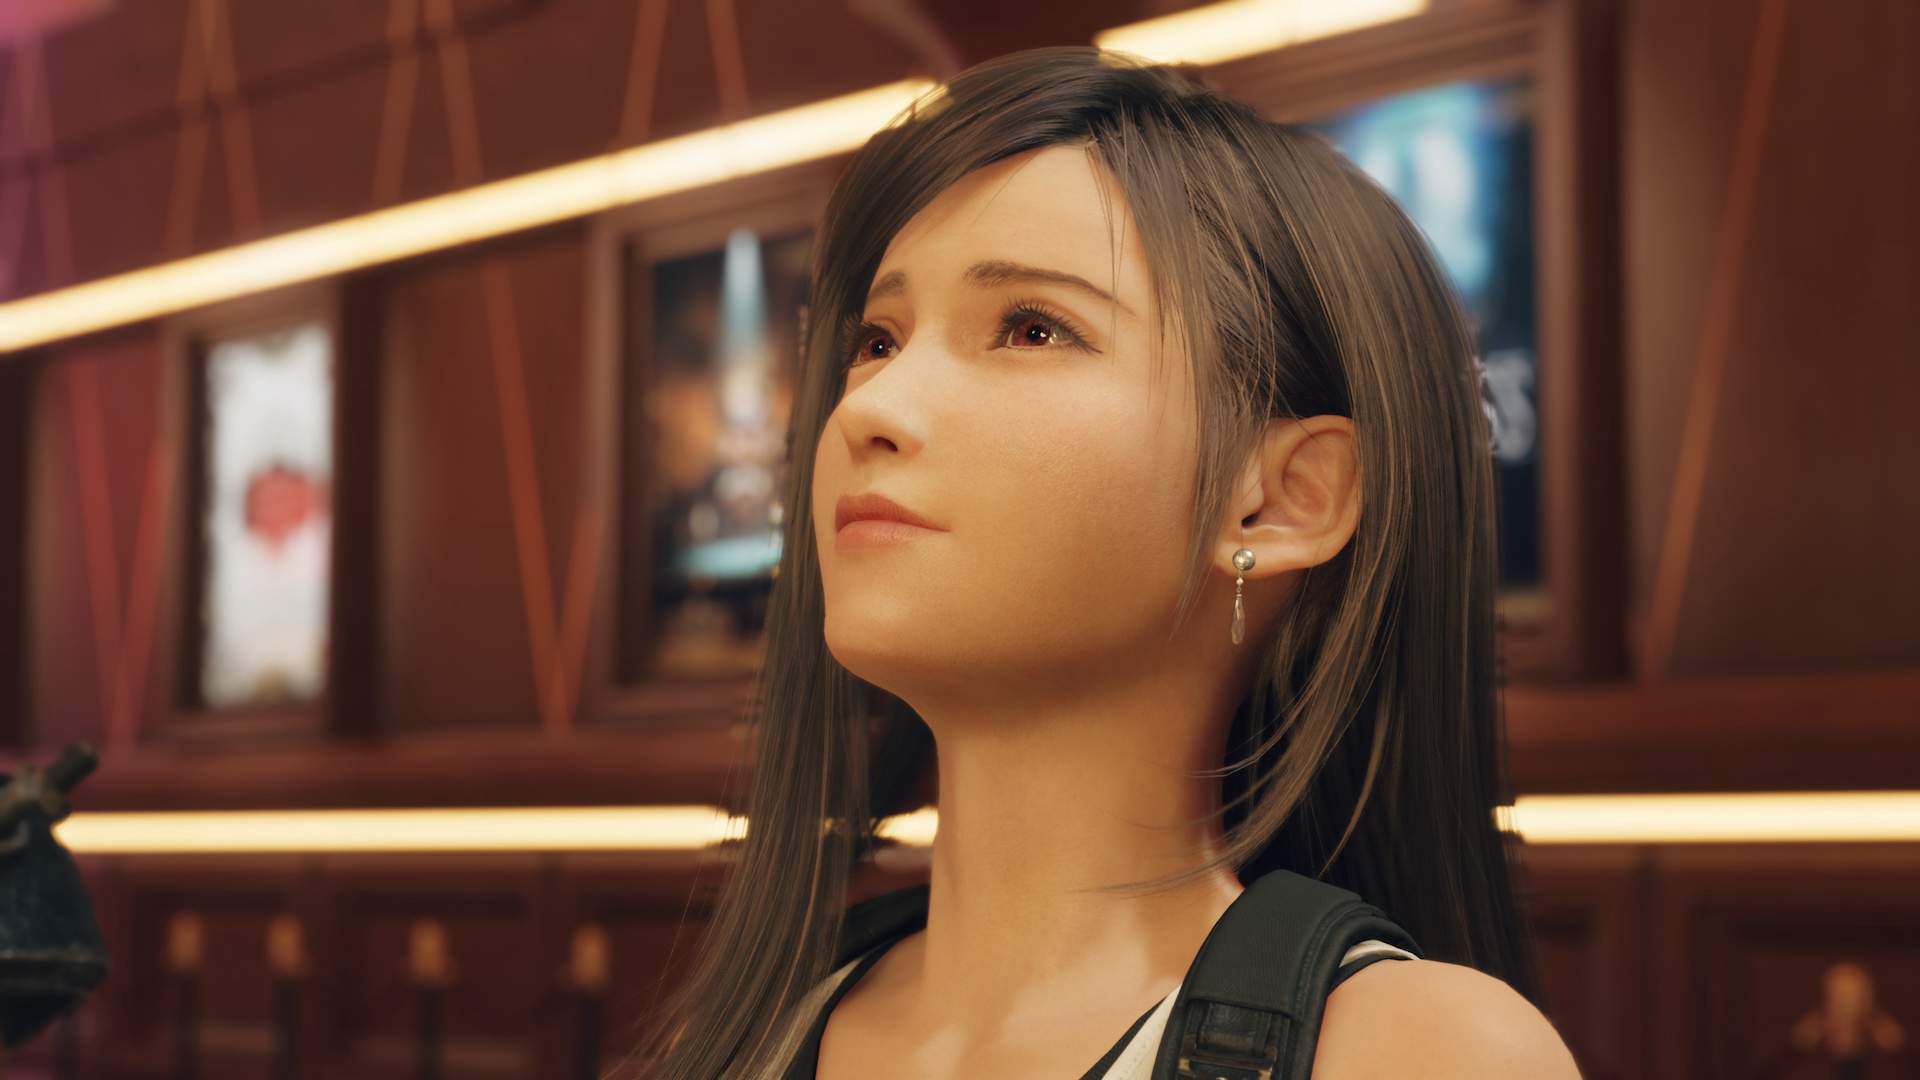 Final Fantasy VII Director a “Bit Embarrassed” by Original Game’s Social and Cultural Depictions